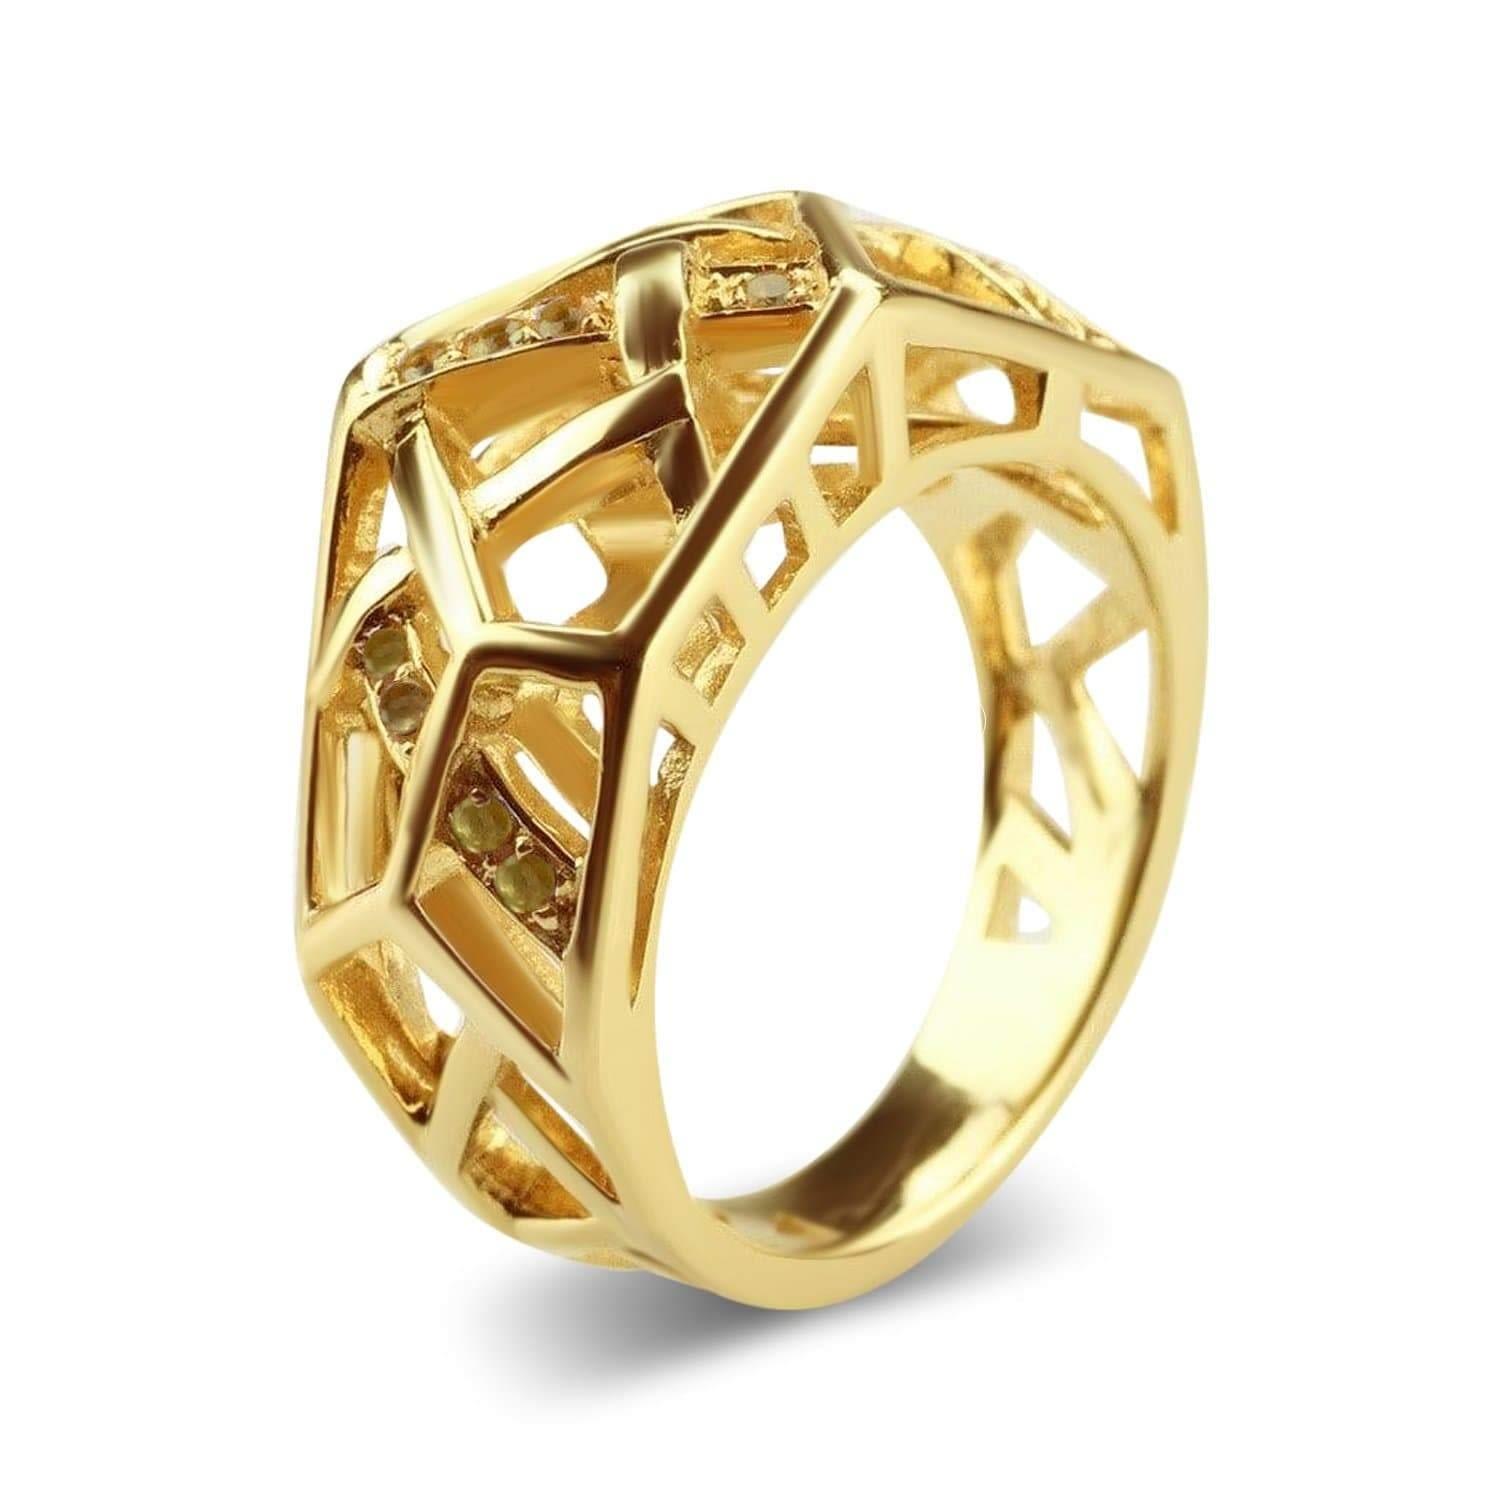 Bellus Domina Gold Plated Crossover Citrine Ring in Metallic - Lyst